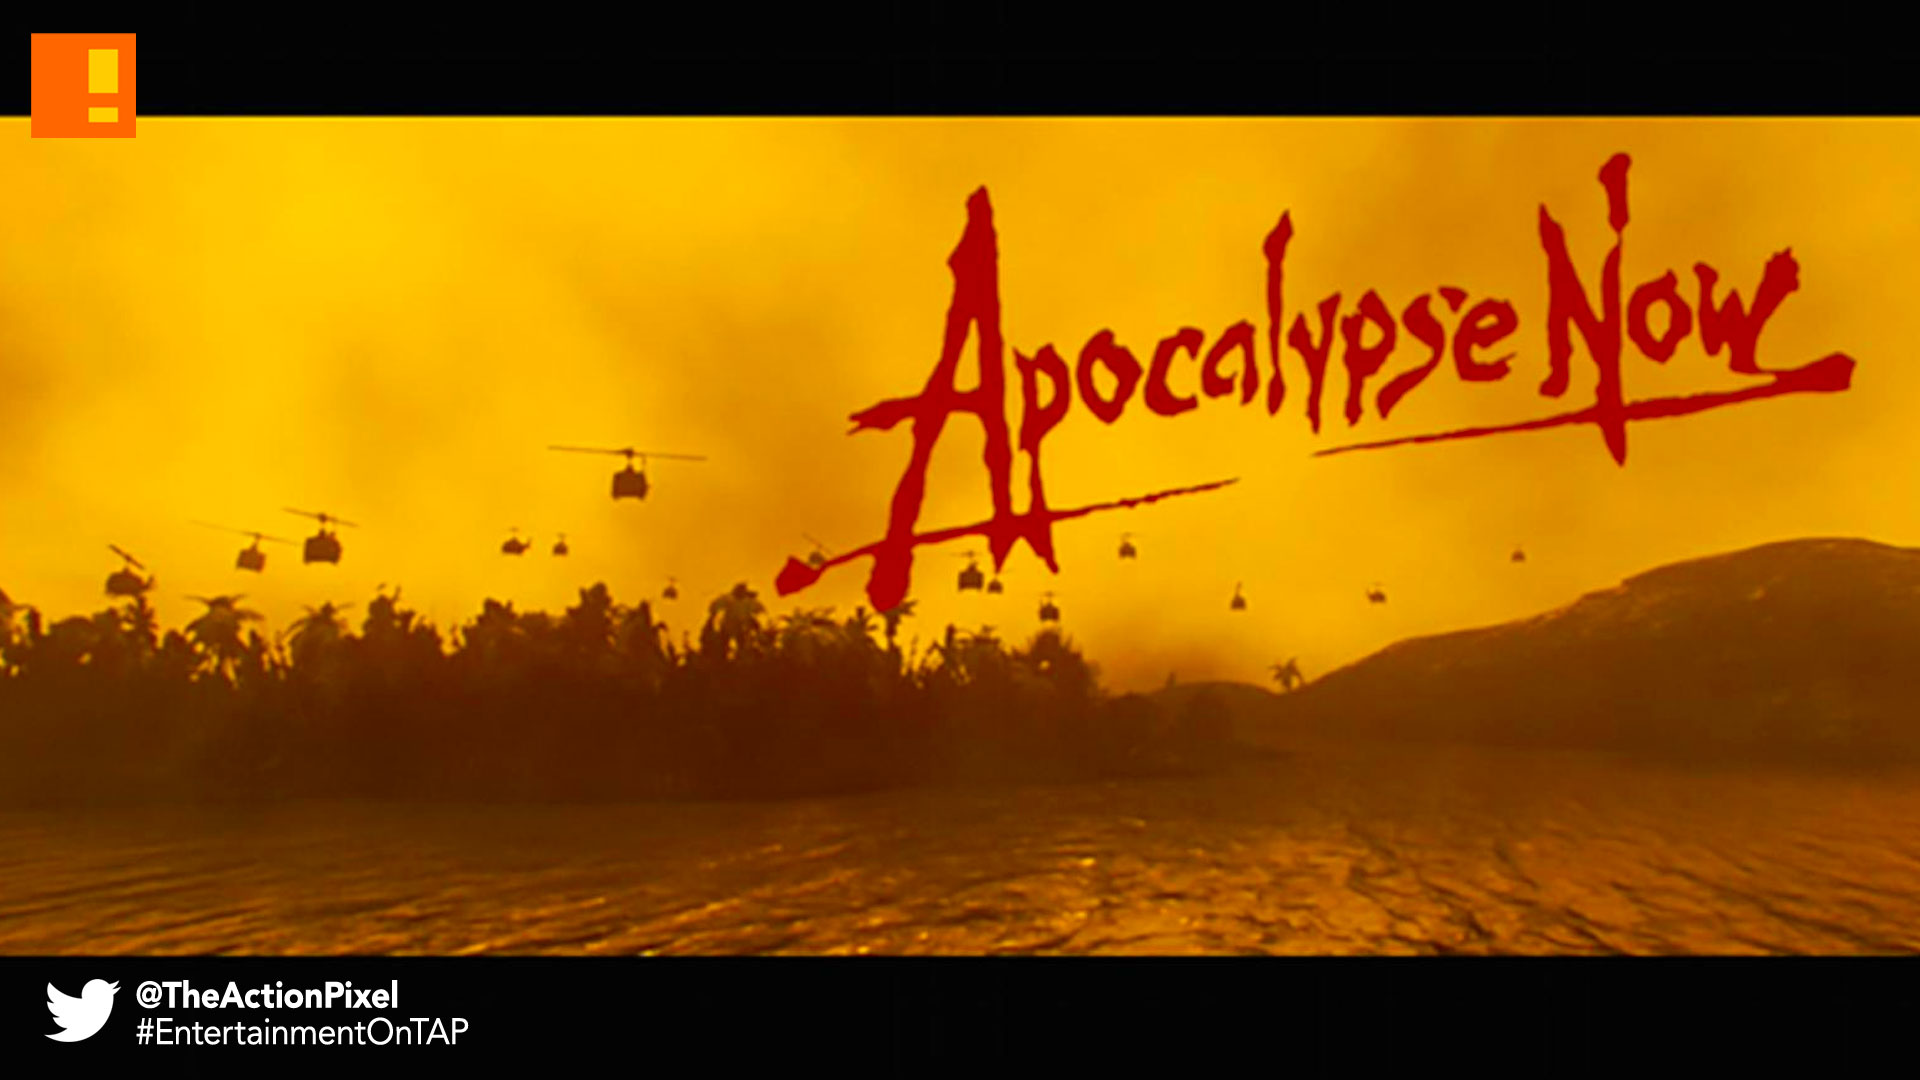 apocalypse now, video game, the action pixel, entertainment on tap, the action pixel